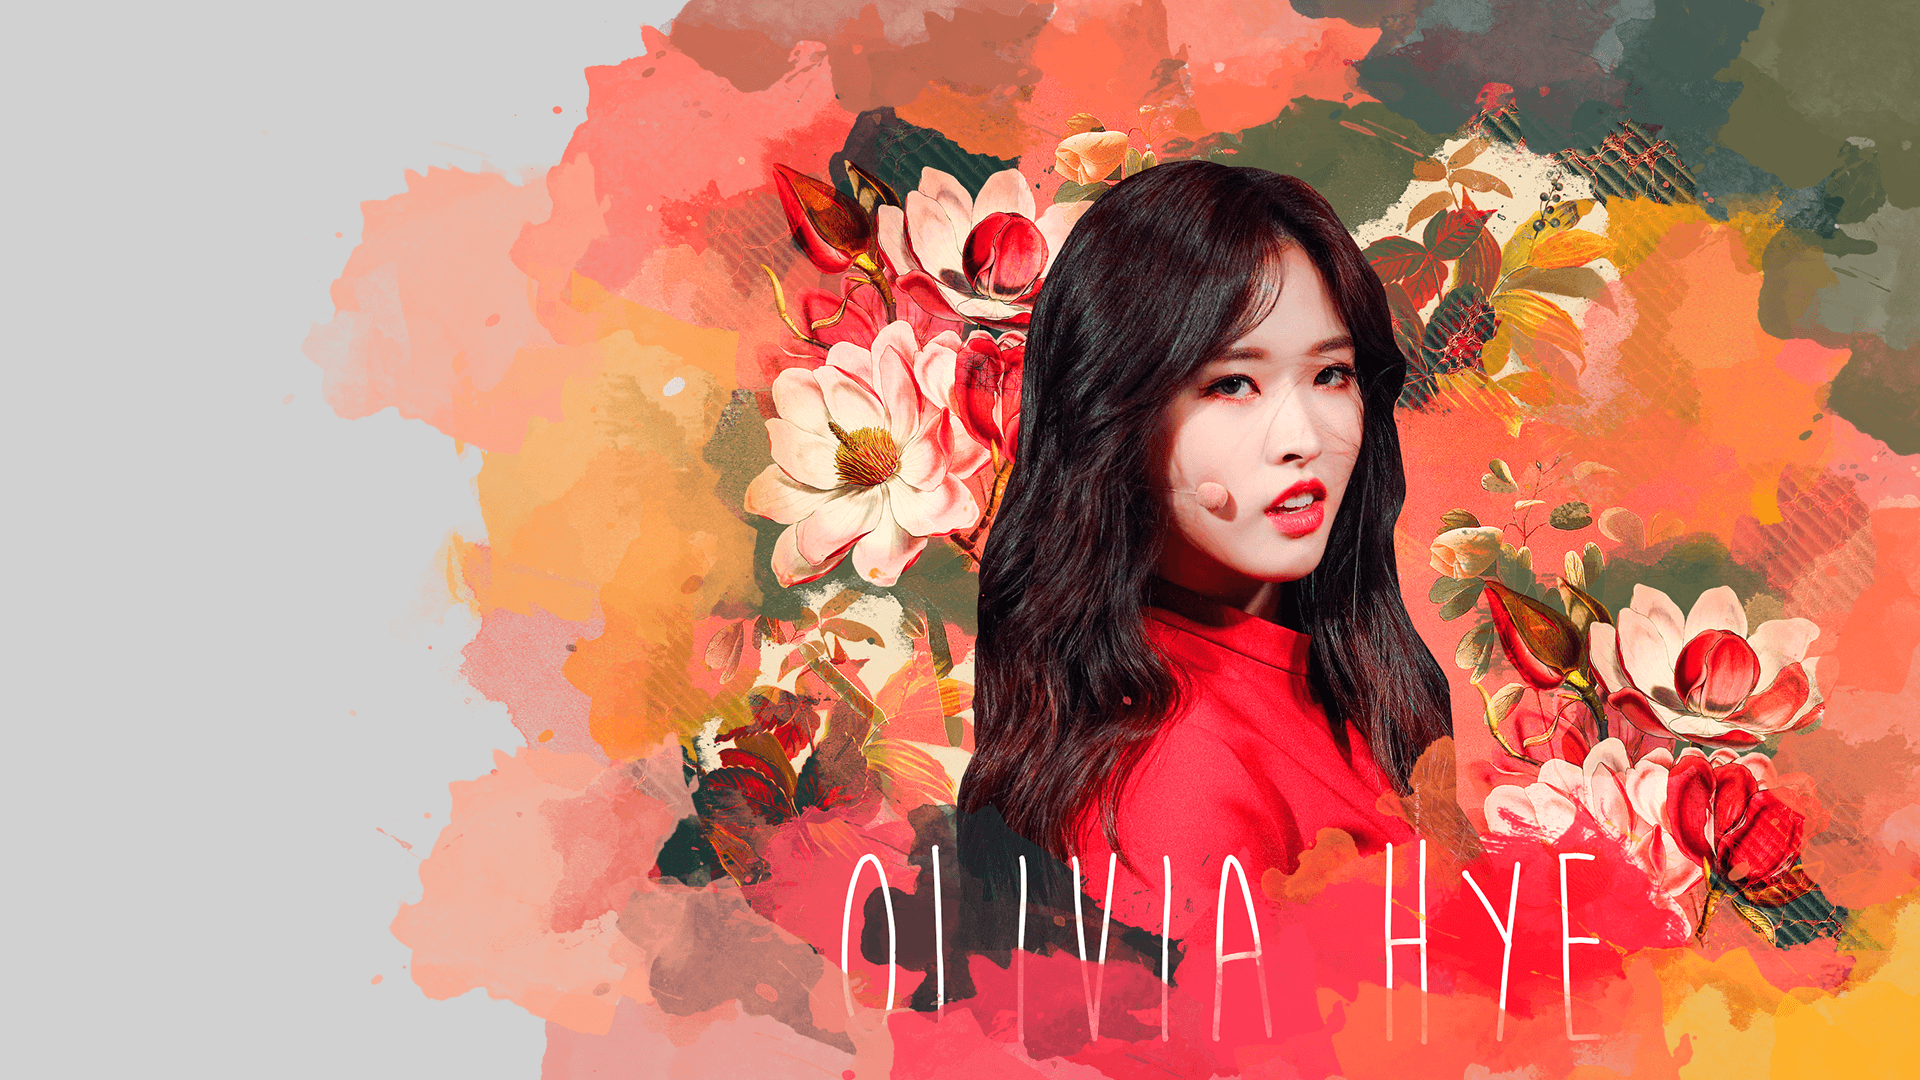 Olivia hye wallpapers